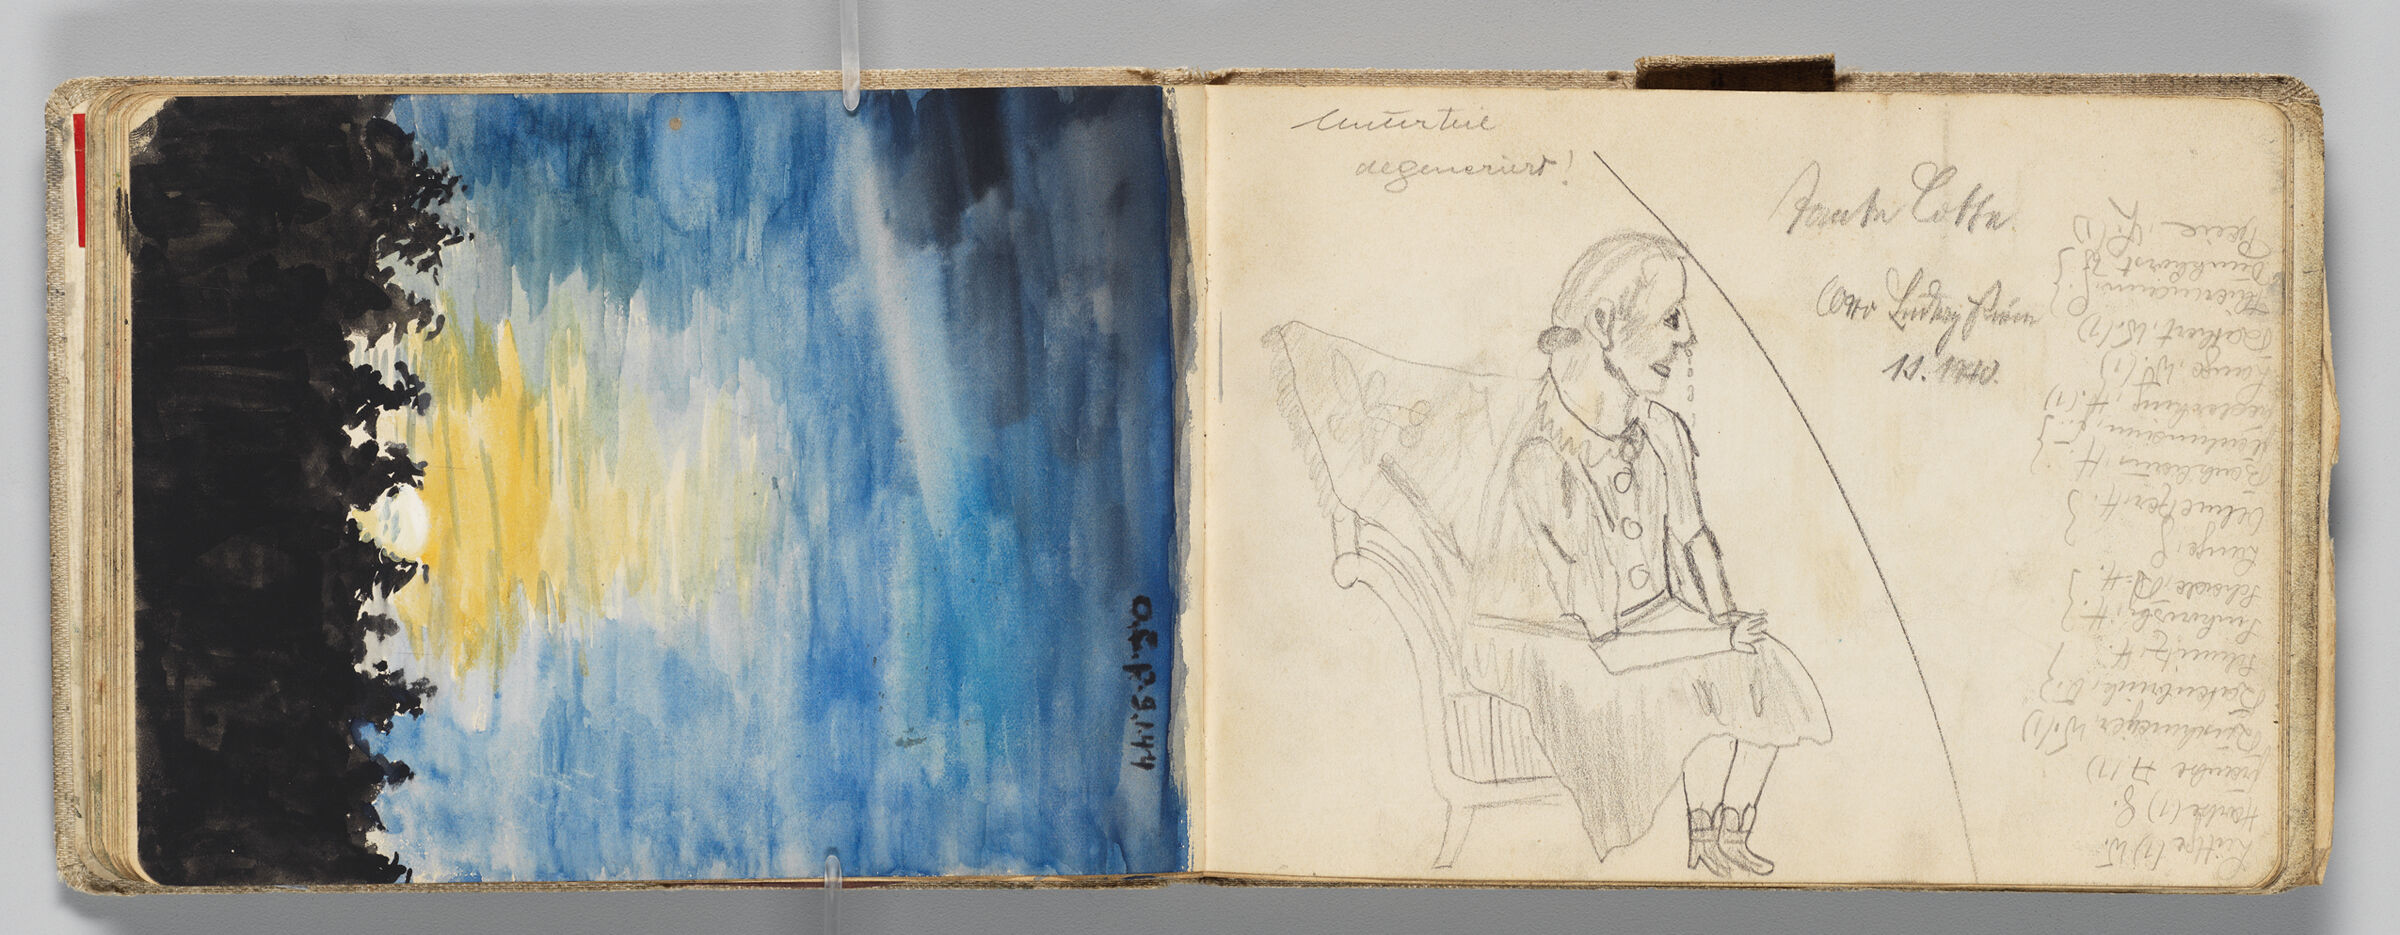 Untitled (Sun Above Forrest, Left Page); Untitled (Sketch Of Seated Woman [Artist's Aunt], Right Page)